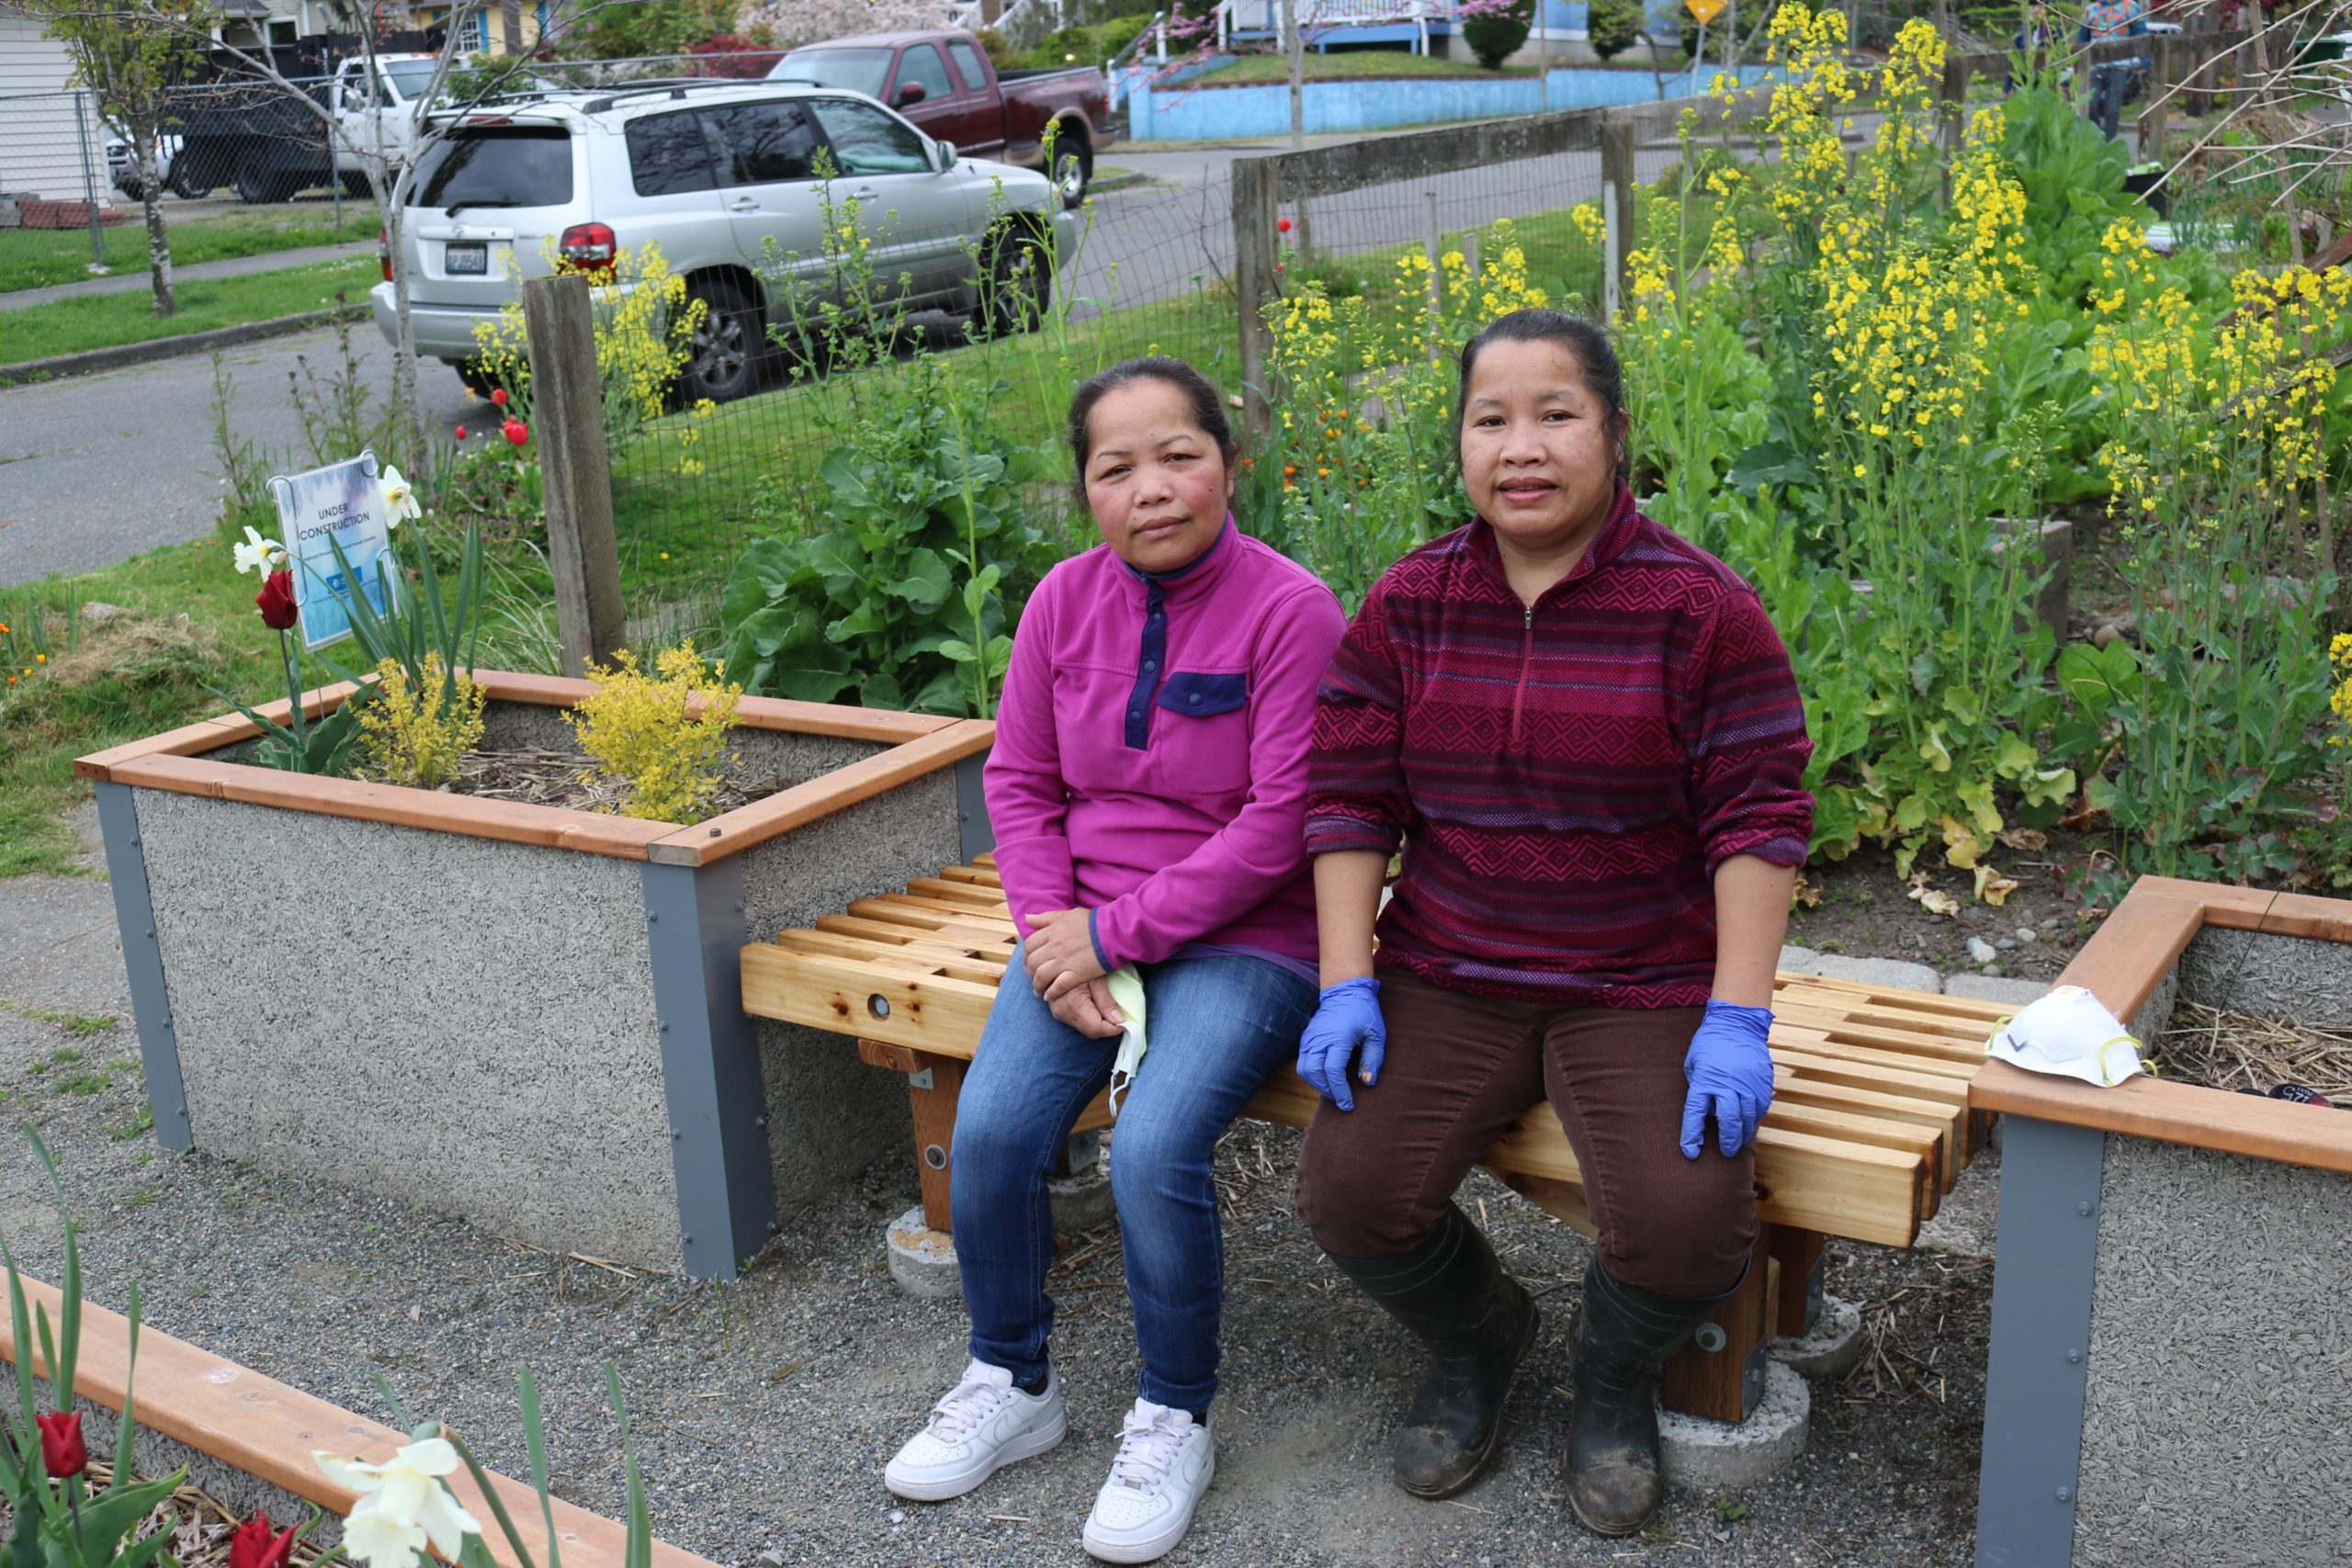 Rangkham’s daughters Boukham and Suangrang sitting on the bench at the memorial garden